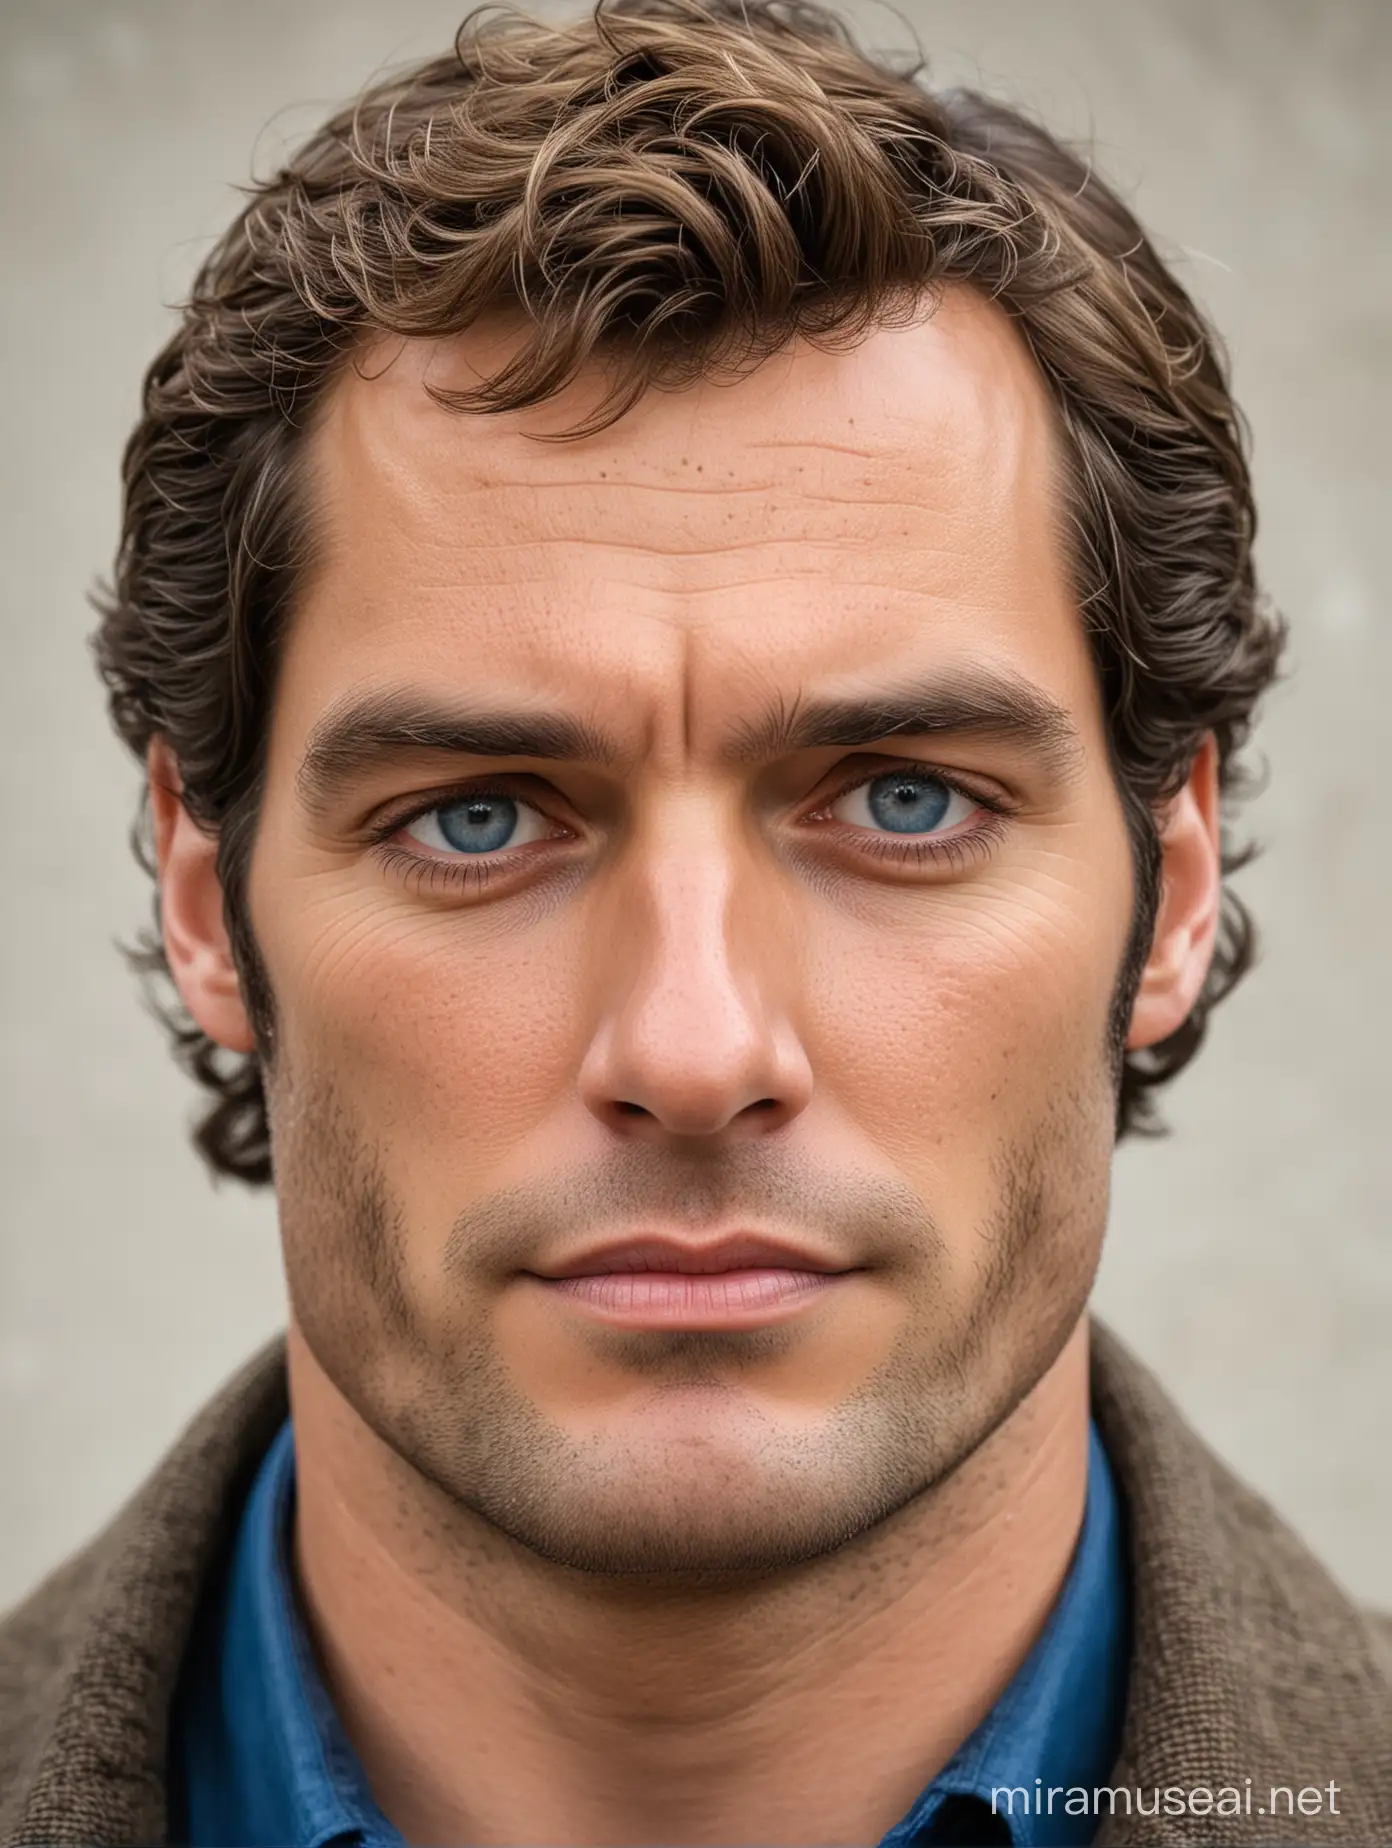 Closeup Portrait of a Henry Cavill Lookalike with Light Brown Hair and Blue Eyes